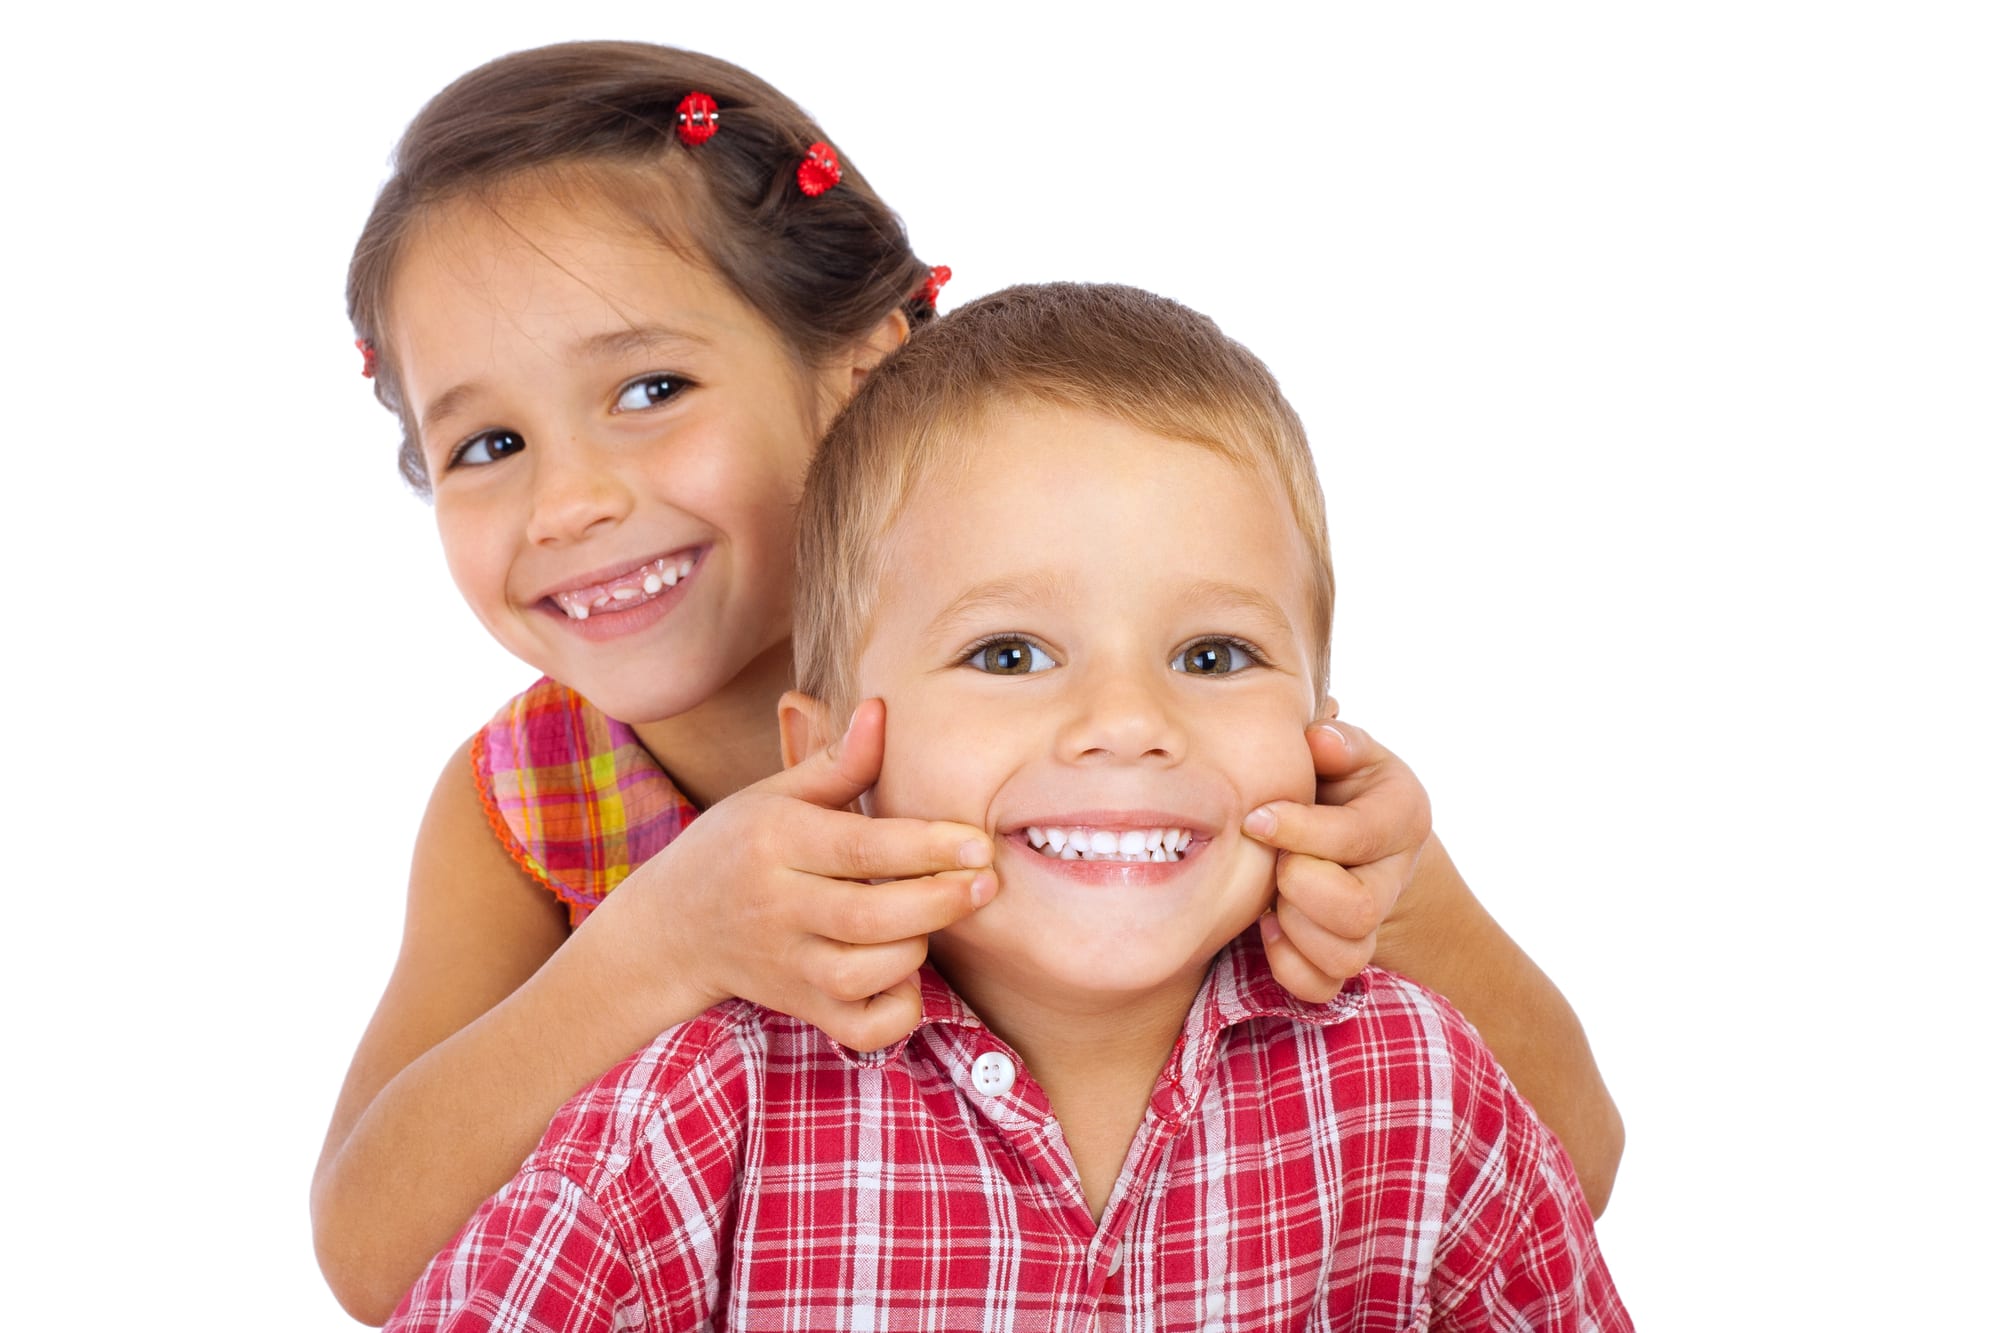 10 Questions for Your Pediatric Dentist